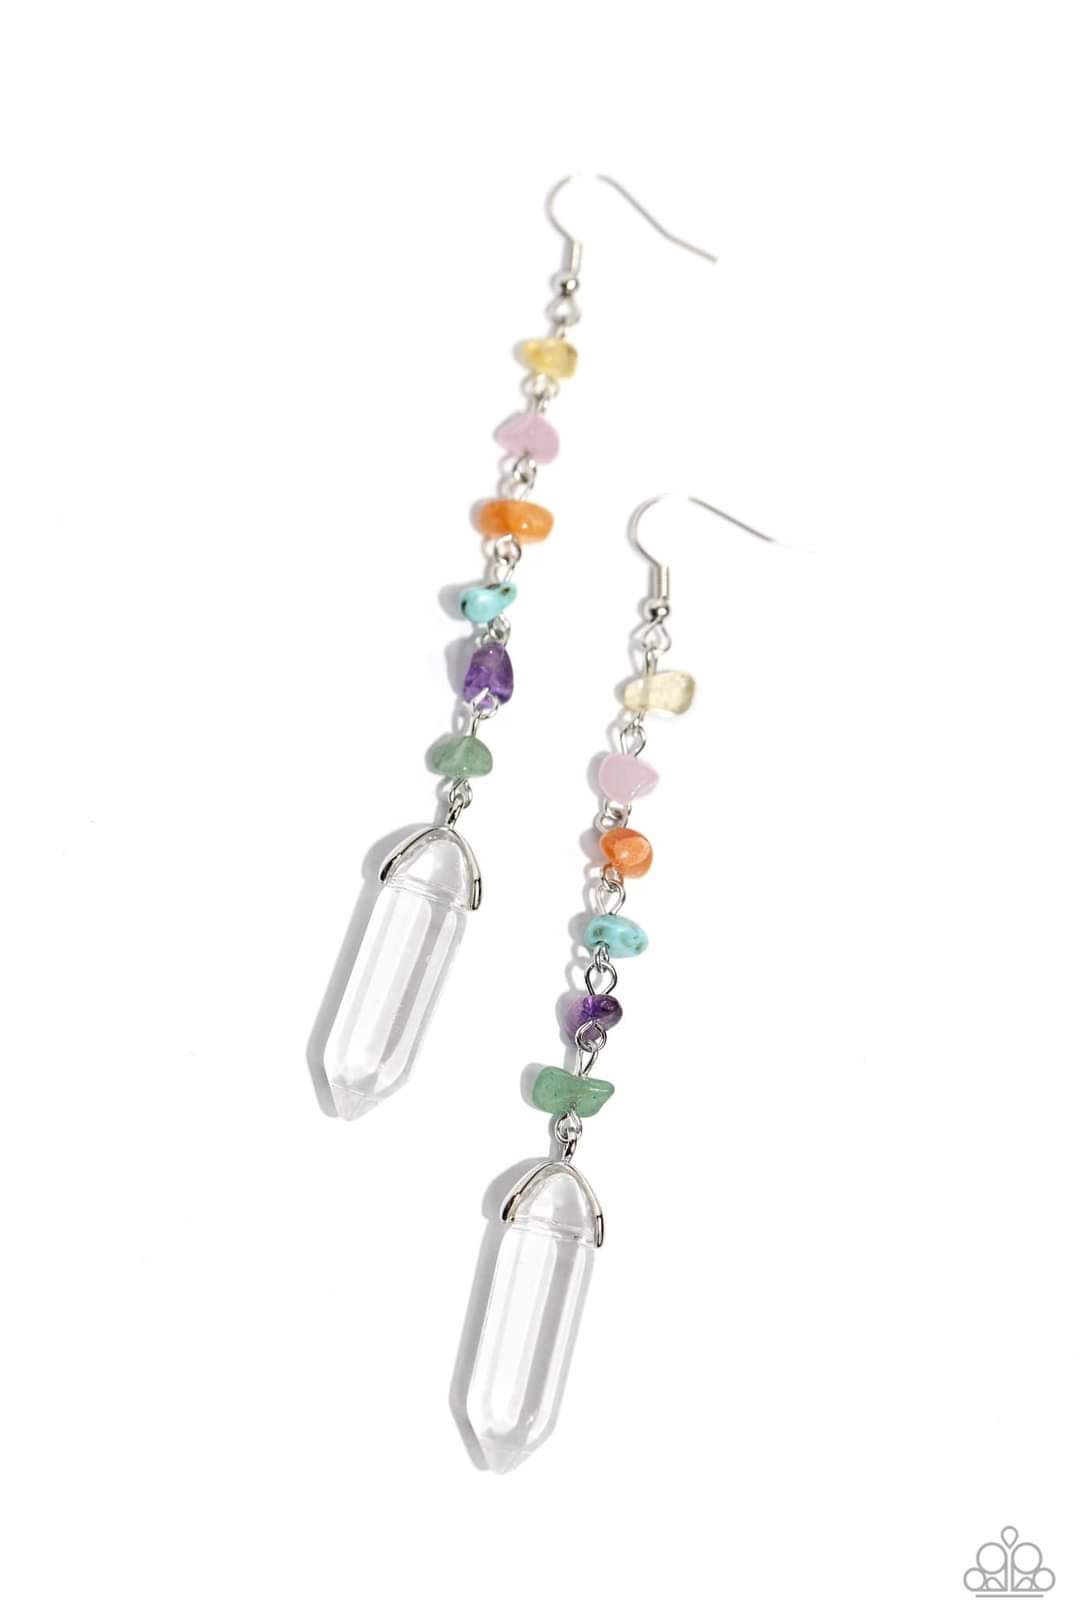 Quartz Qualification Multi Color Earrings - Paparazzi Accessories - Chiseled multicolored stones connect down the ear along a silver chain, leading the eye to a clear quartz-like piece at its end for an elegantly earthy lure. Earring attaches to a standard fishhook fitting.